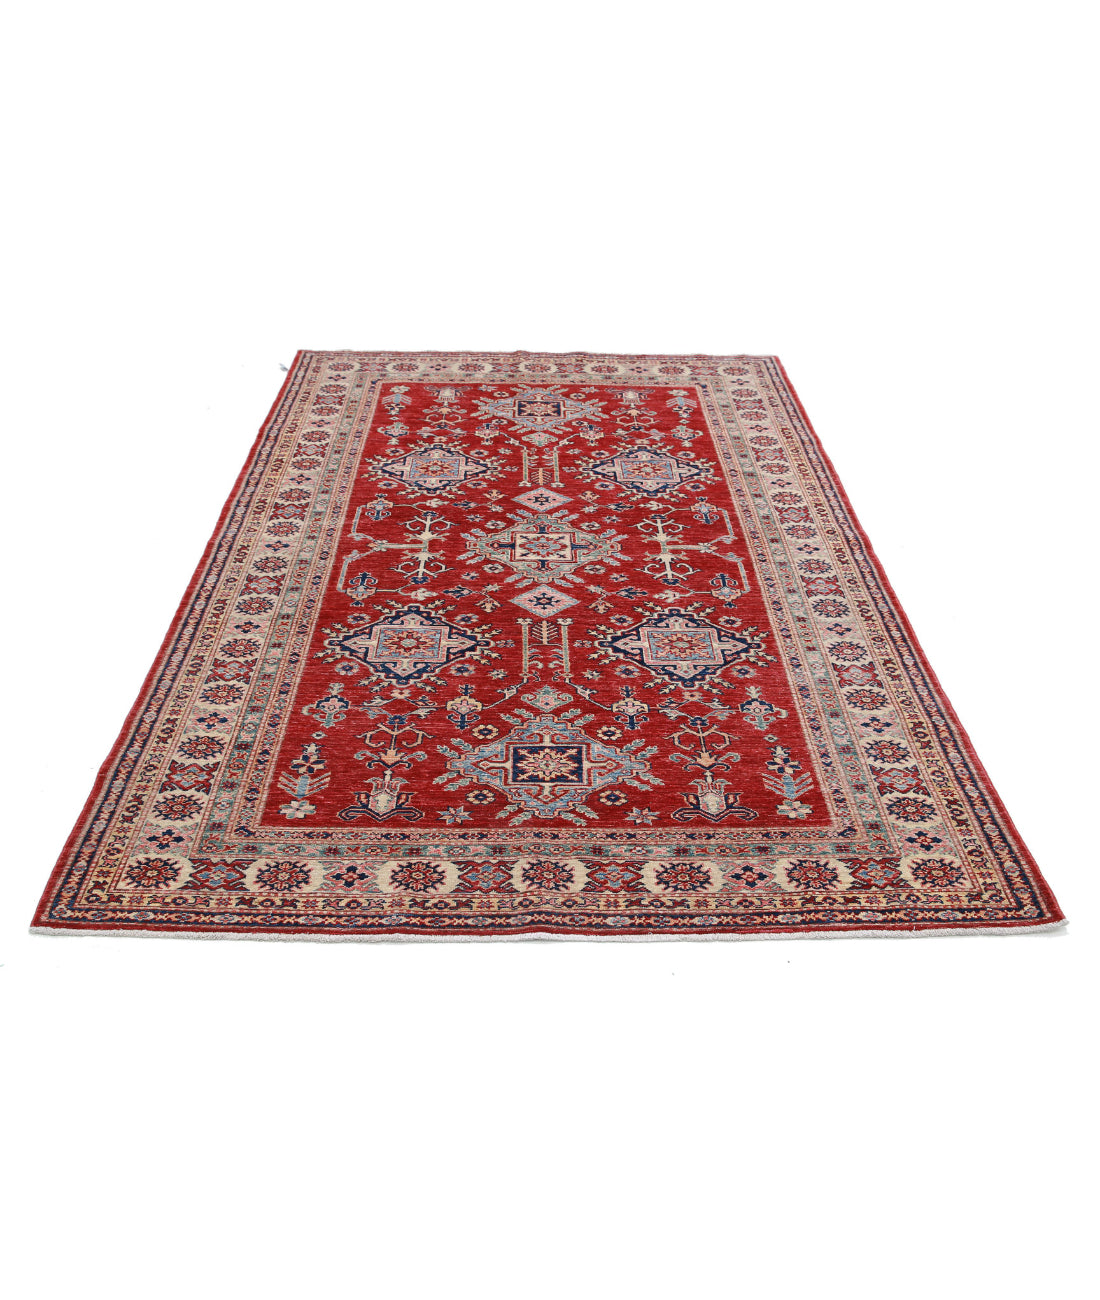 Hand Knotted Royal Kazak Wool Rug - 5'4'' x 7'8'' 5'4'' x 7'8'' (160 X 230) / Red / Ivory